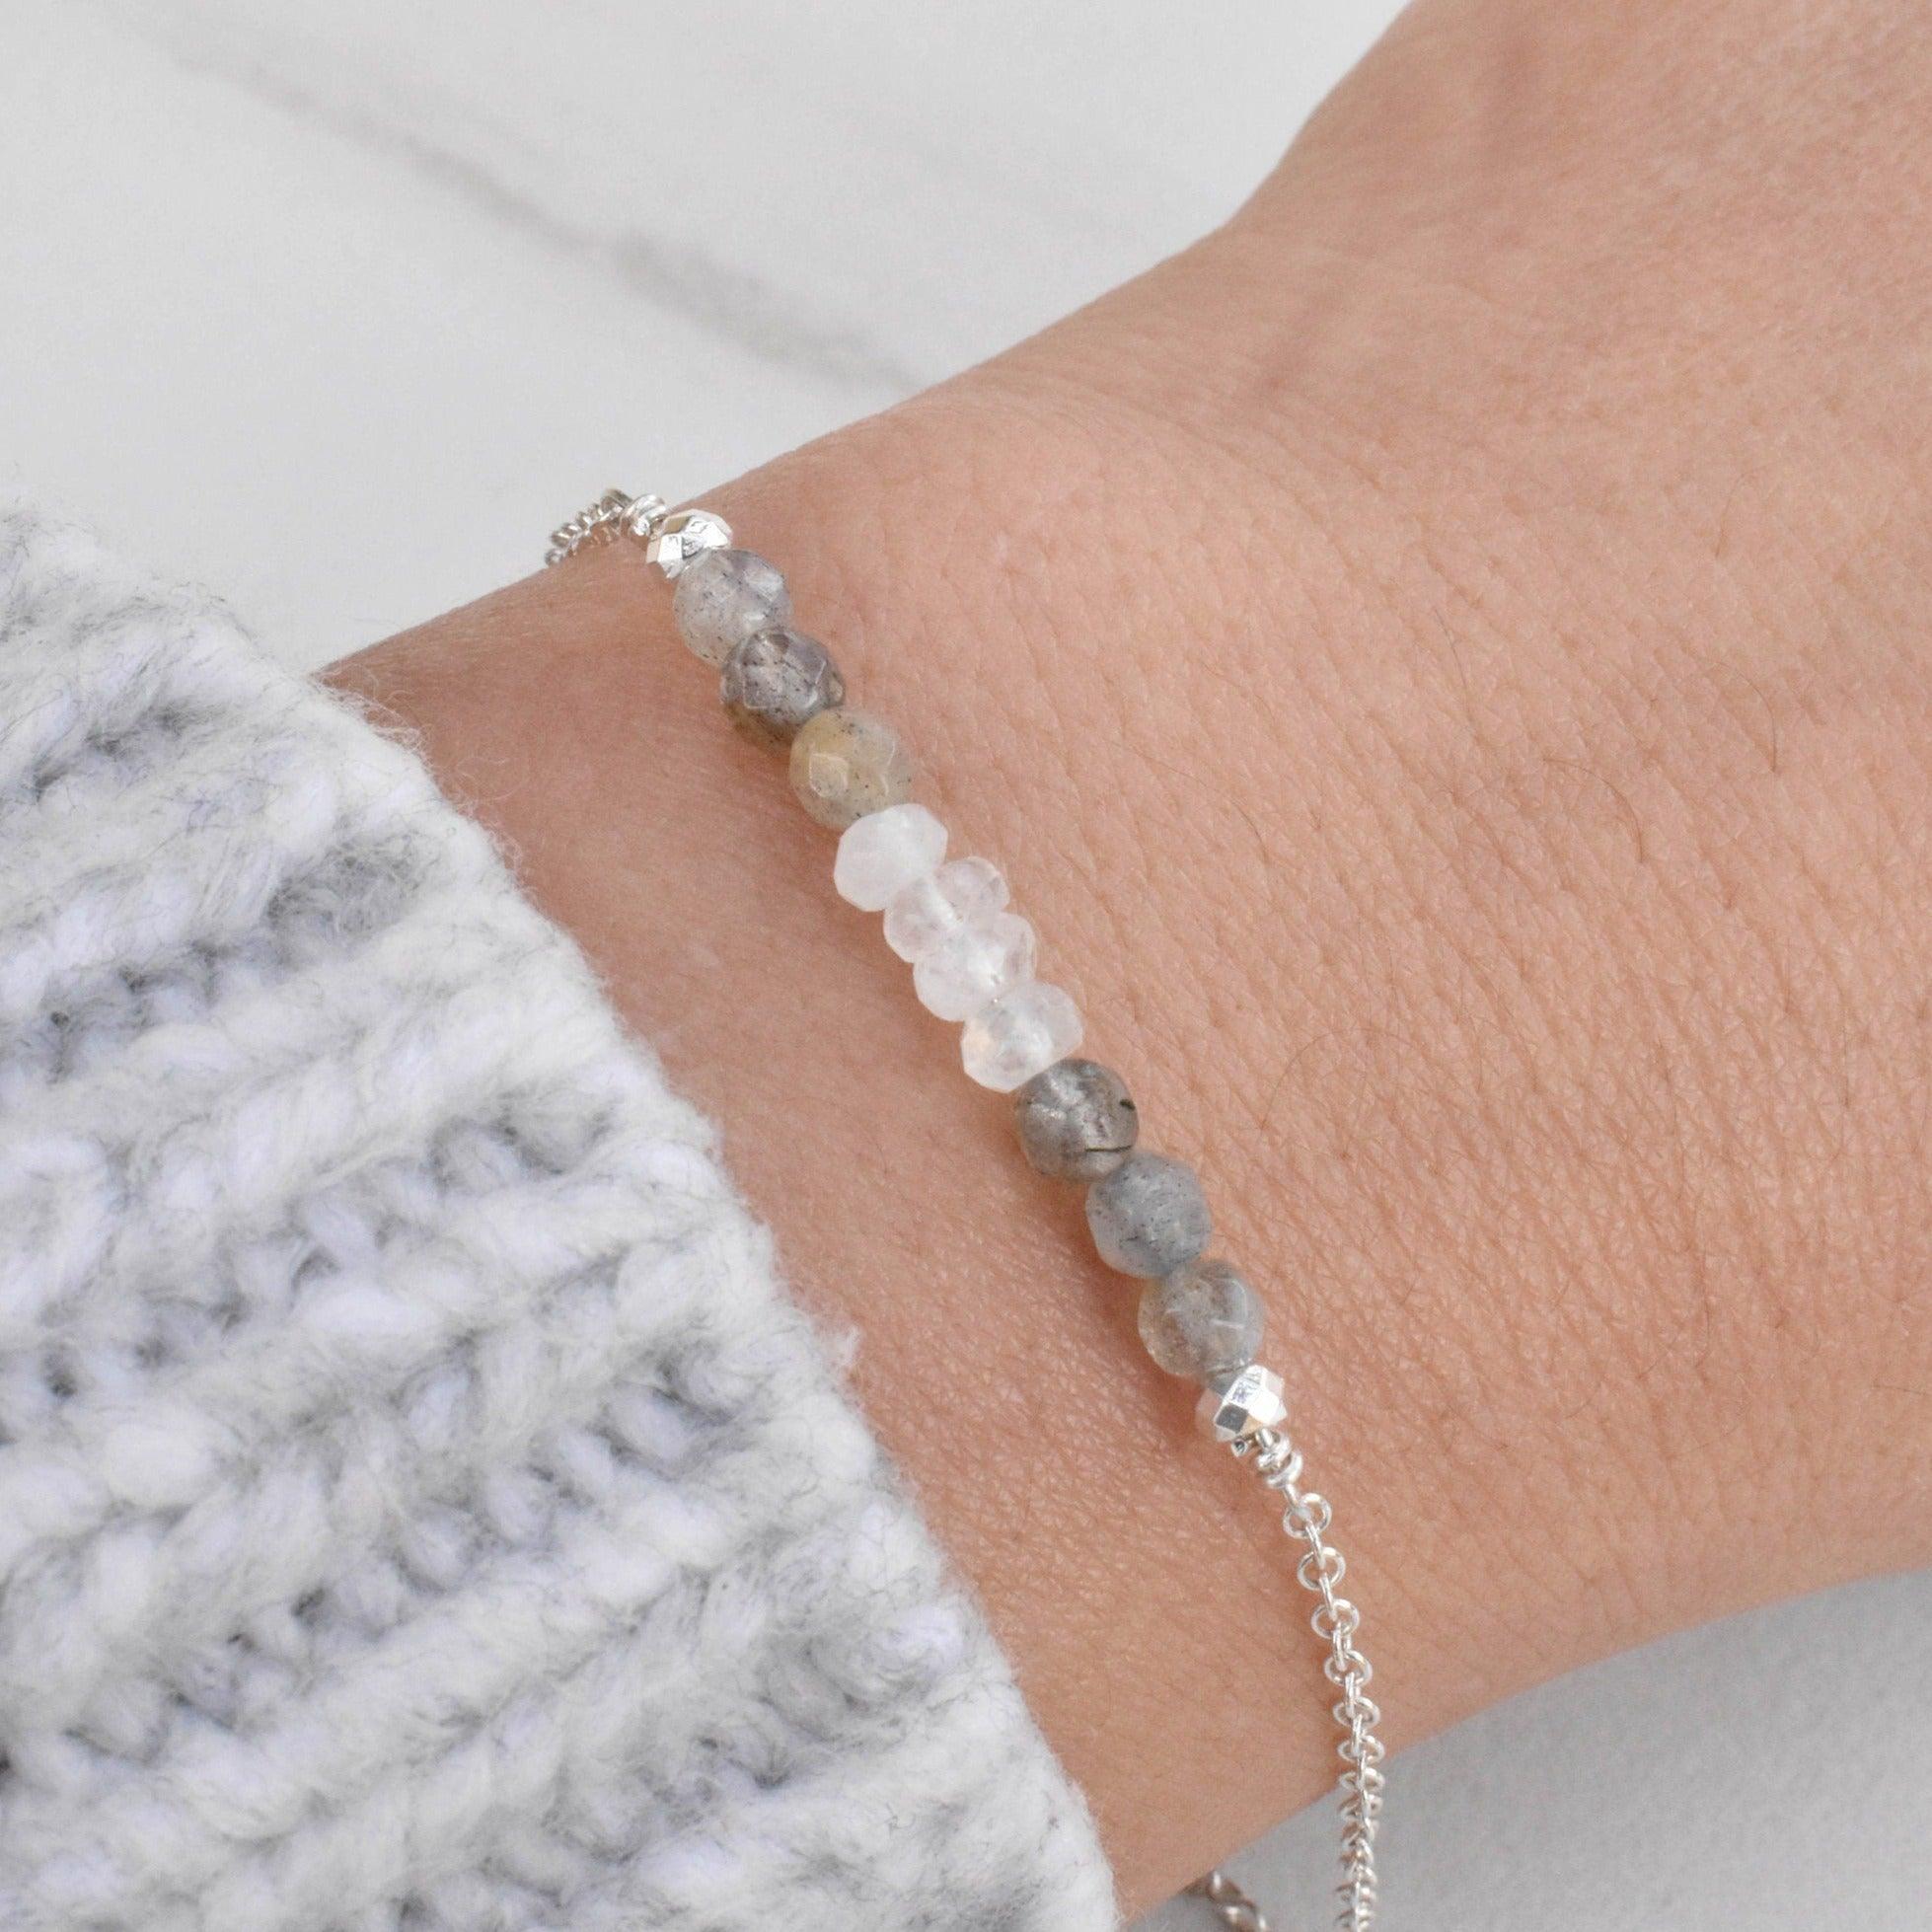 Dainty healing gemstone bracelet to help you develop your intuitive abilities. 